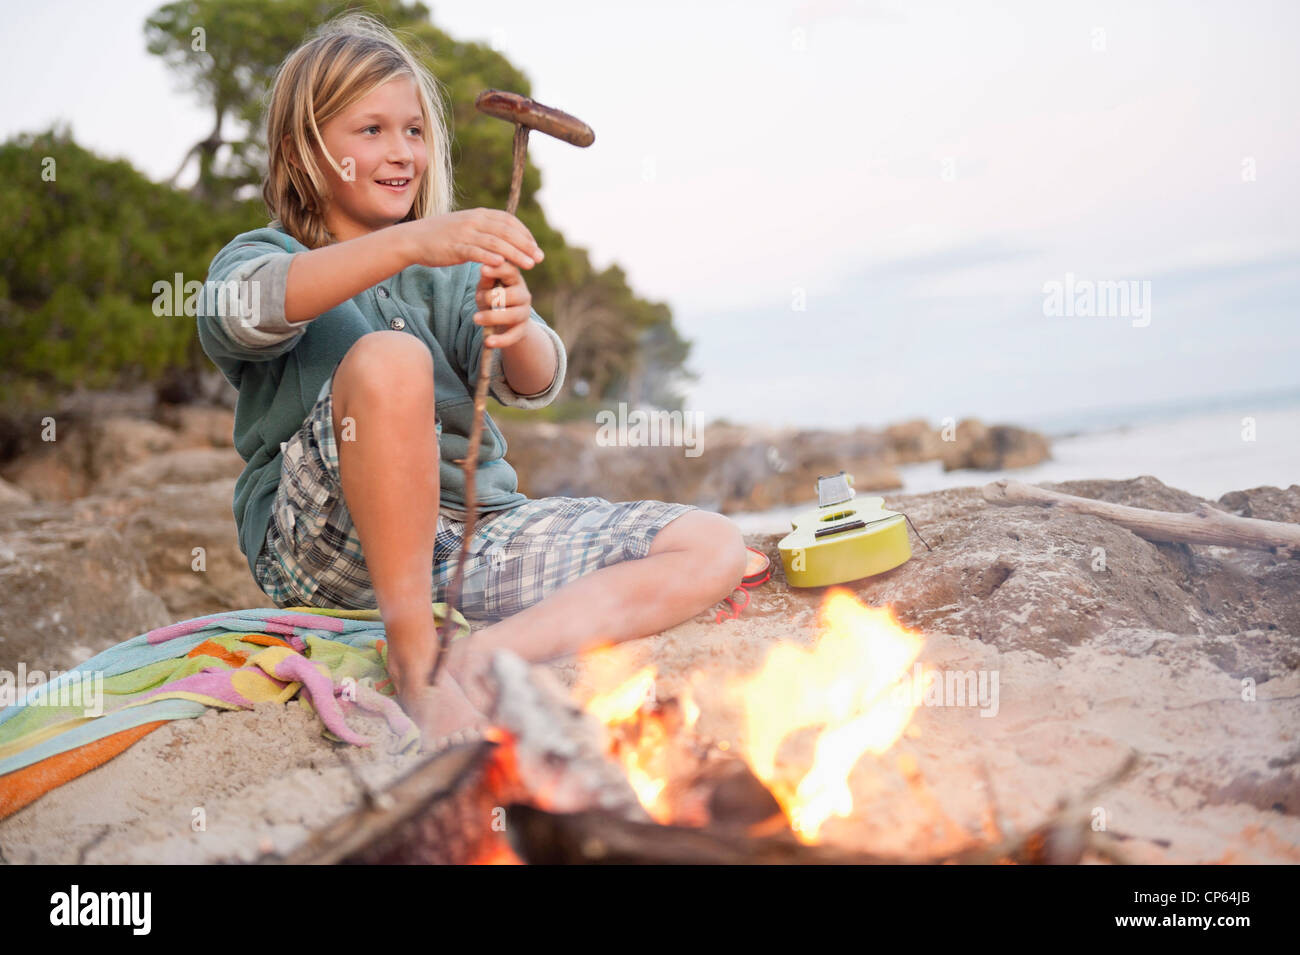 Spain, Mallorca, Boy barbecueing sausage on beach, smiling, portrait Stock Photo